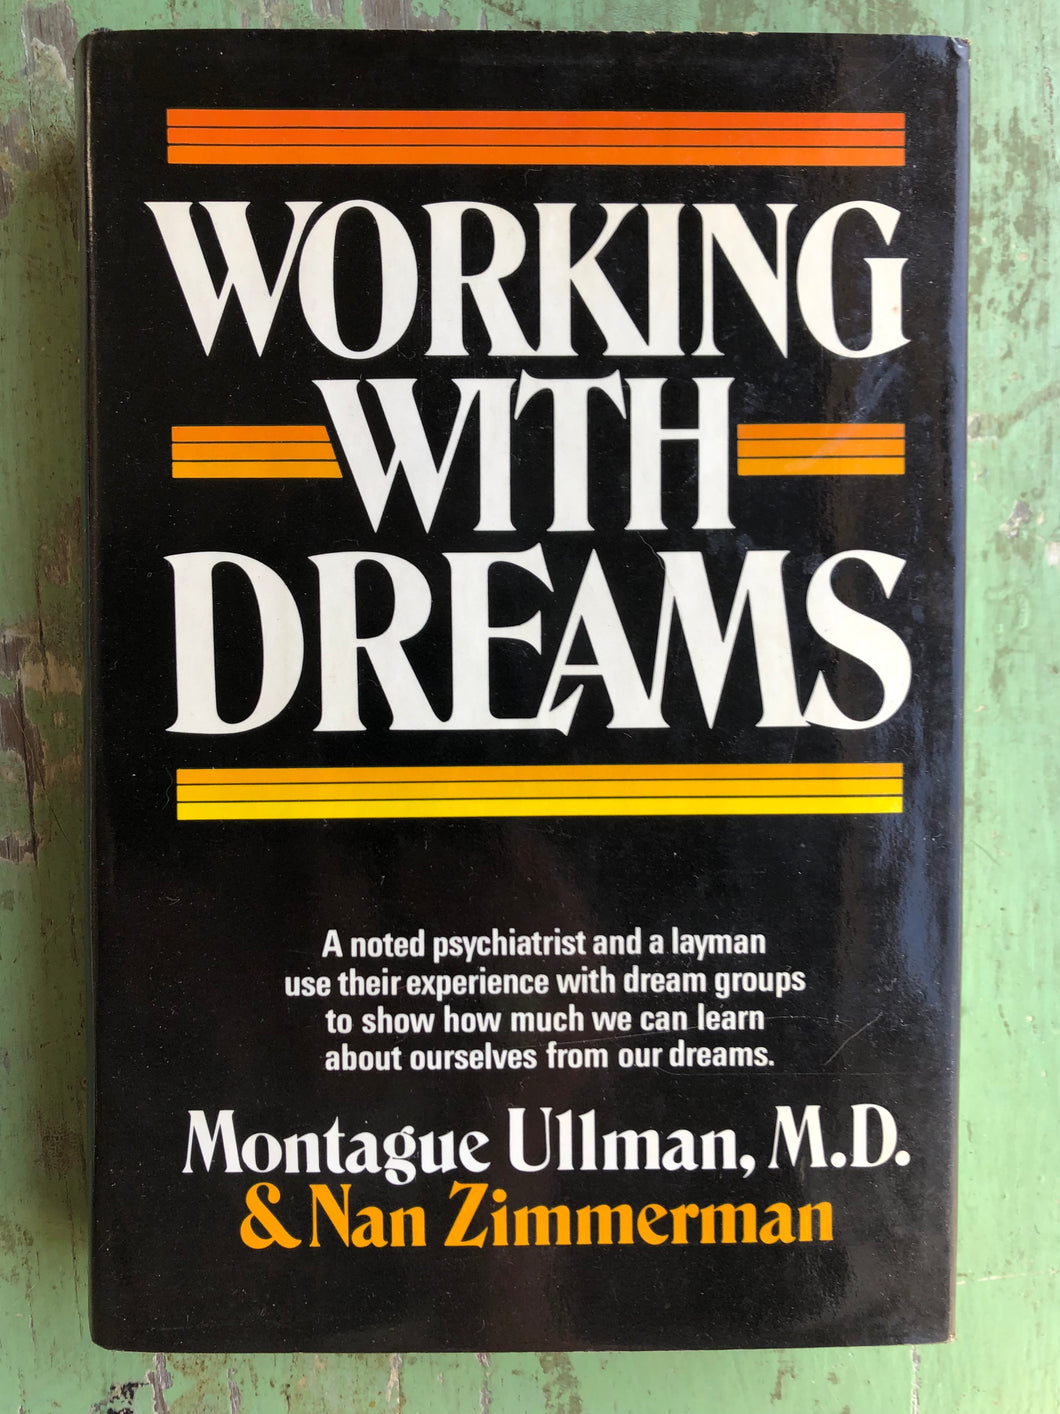 Working with Dreams. by Montague Ullman and Nan Zimmerman